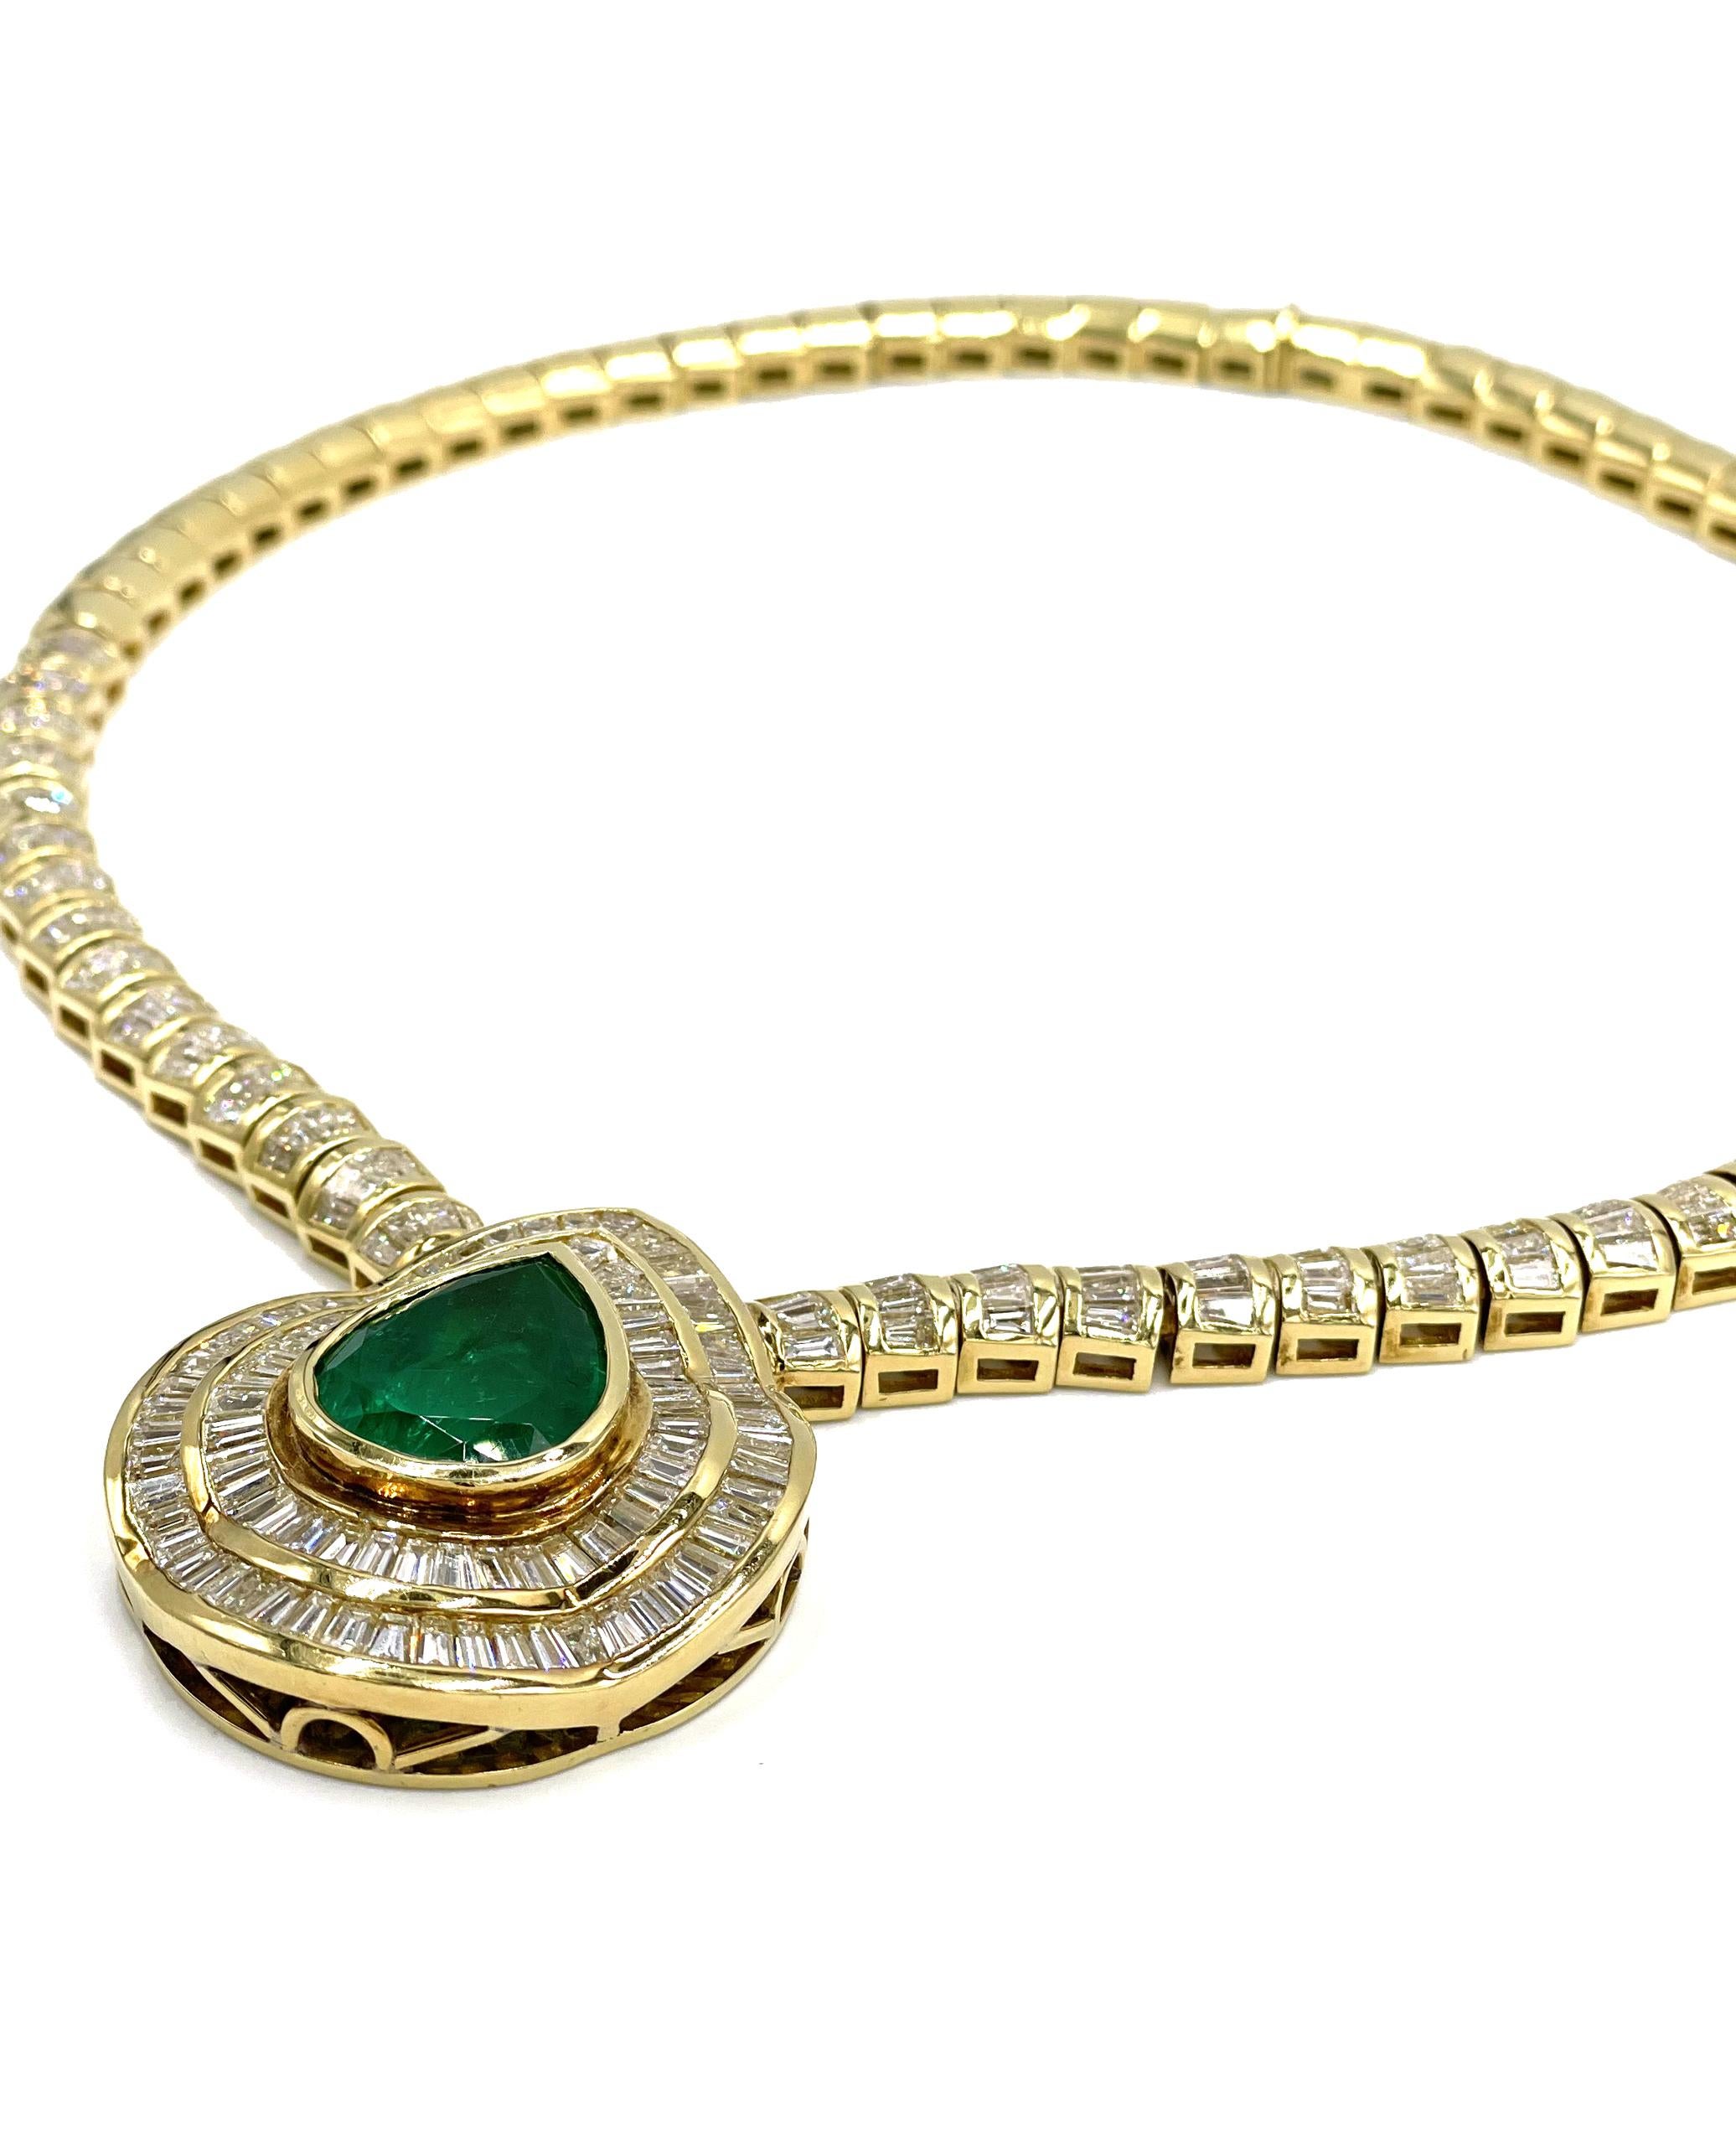 Pear Shape Colombian Emerald Necklace - 18.44 Carat - 18k Yellow Gold In Good Condition For Sale In Old Tappan, NJ